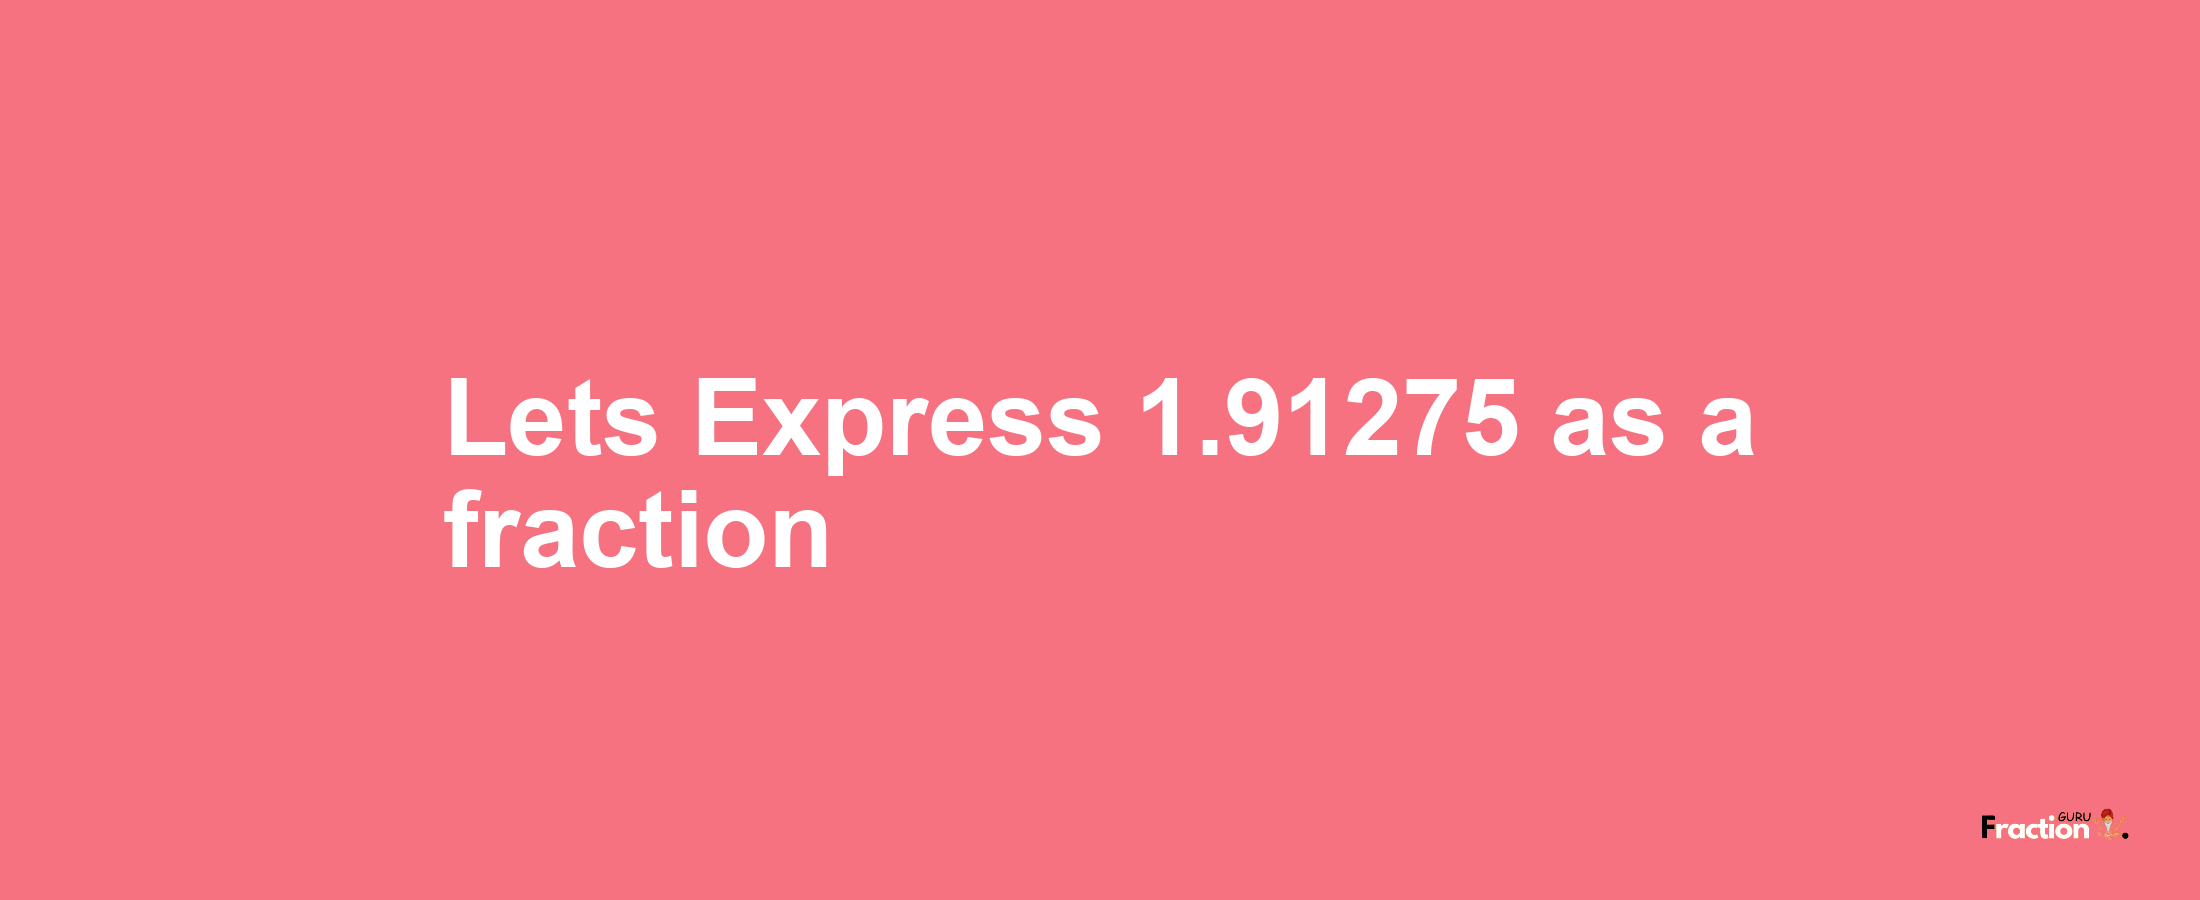 Lets Express 1.91275 as afraction